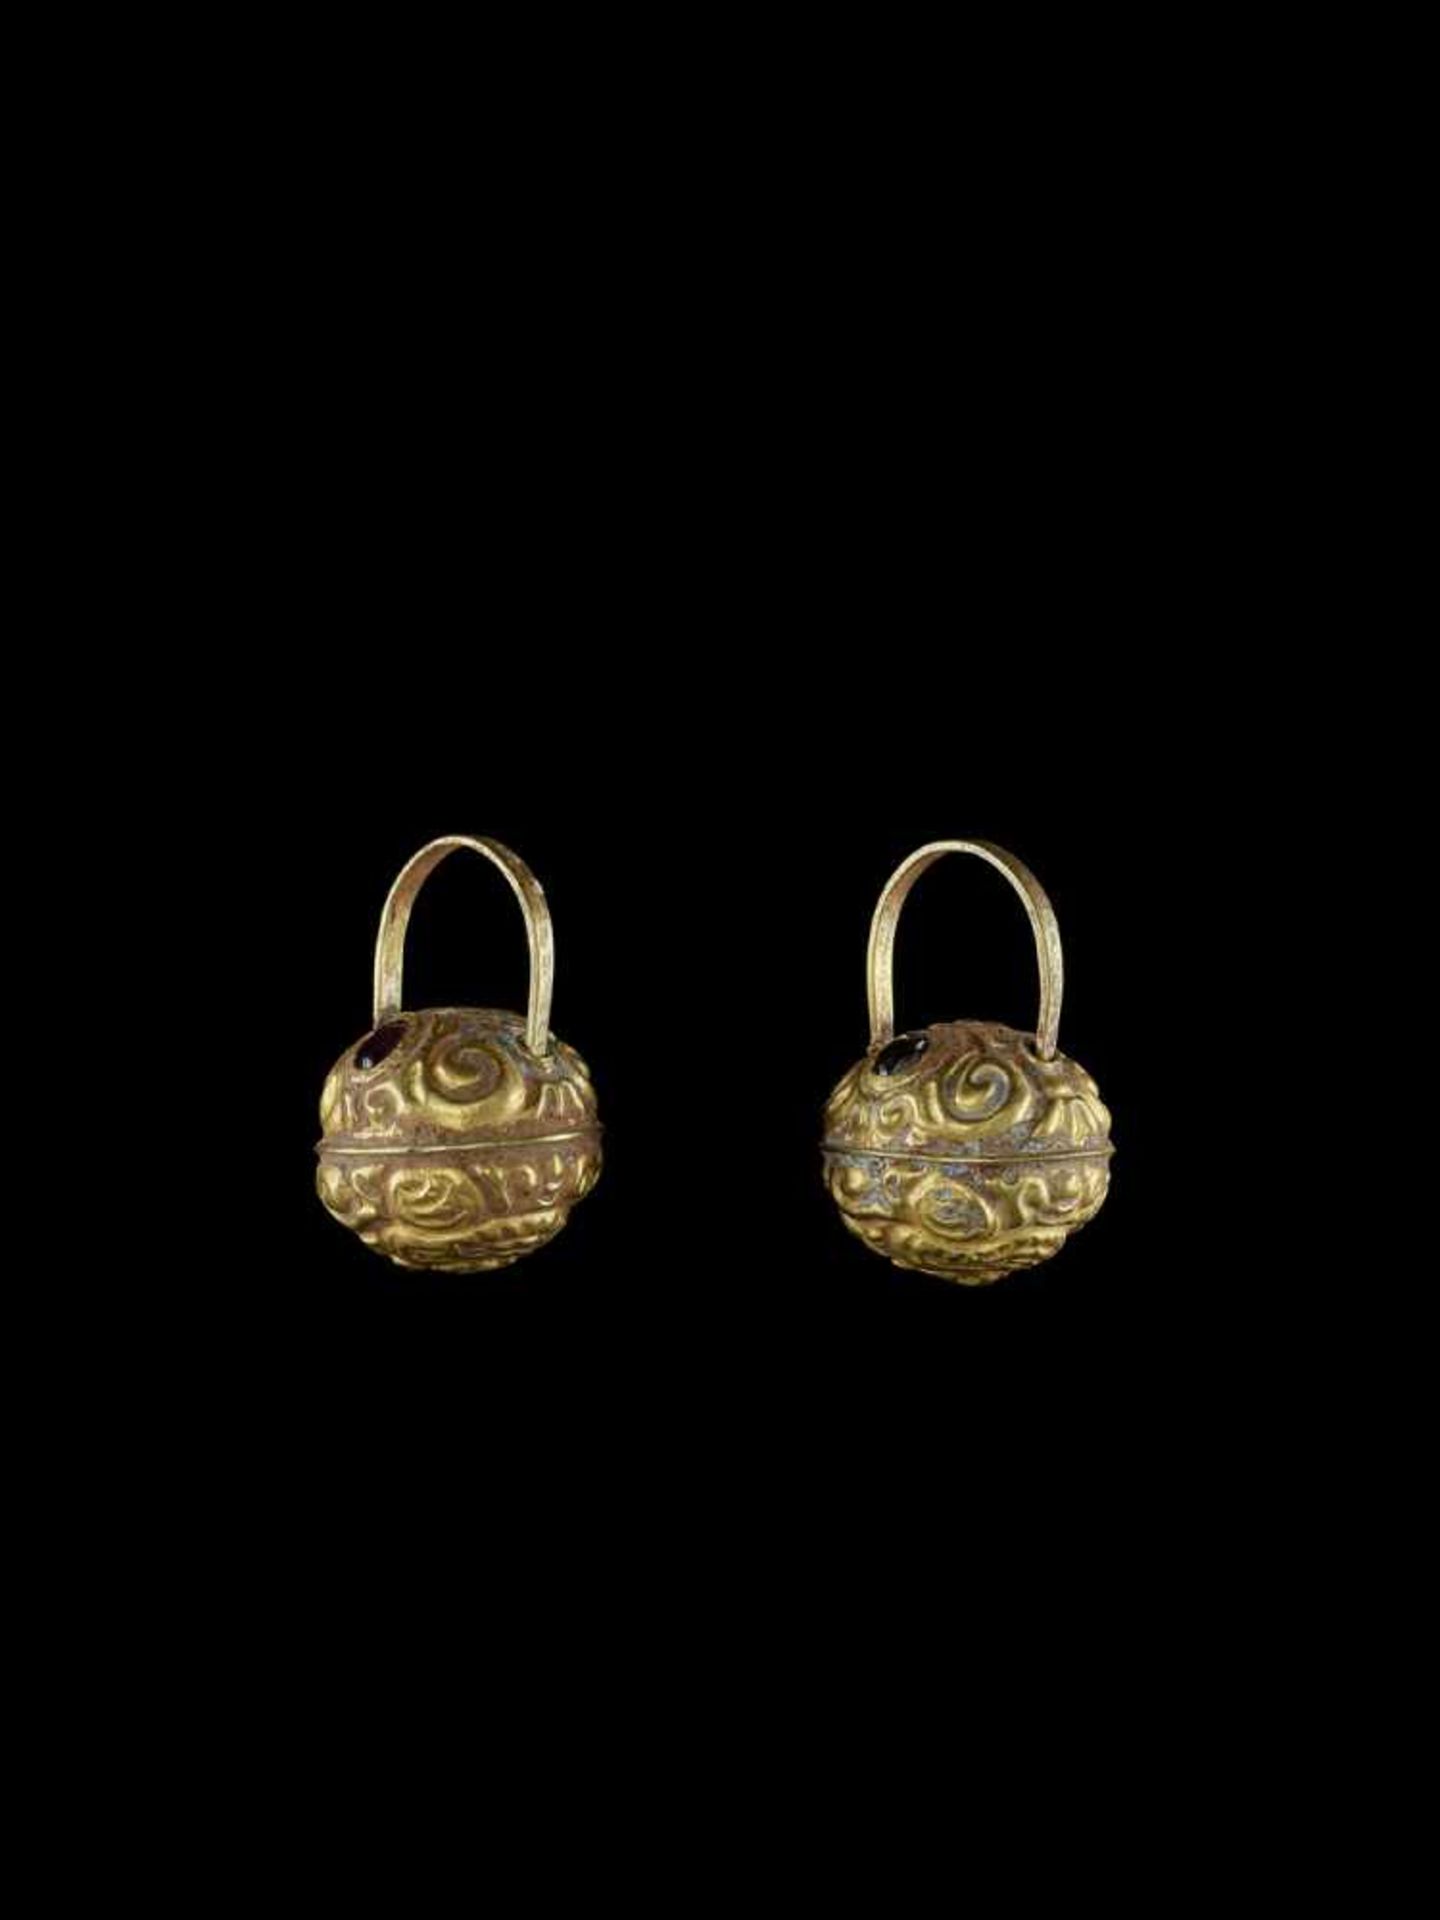 A PAIR OF BELL-SHAPED CHAM REPOUSSÉ GOLD EAR ORNAMENTS Champa, classical period, 10th – 12th - Image 3 of 4